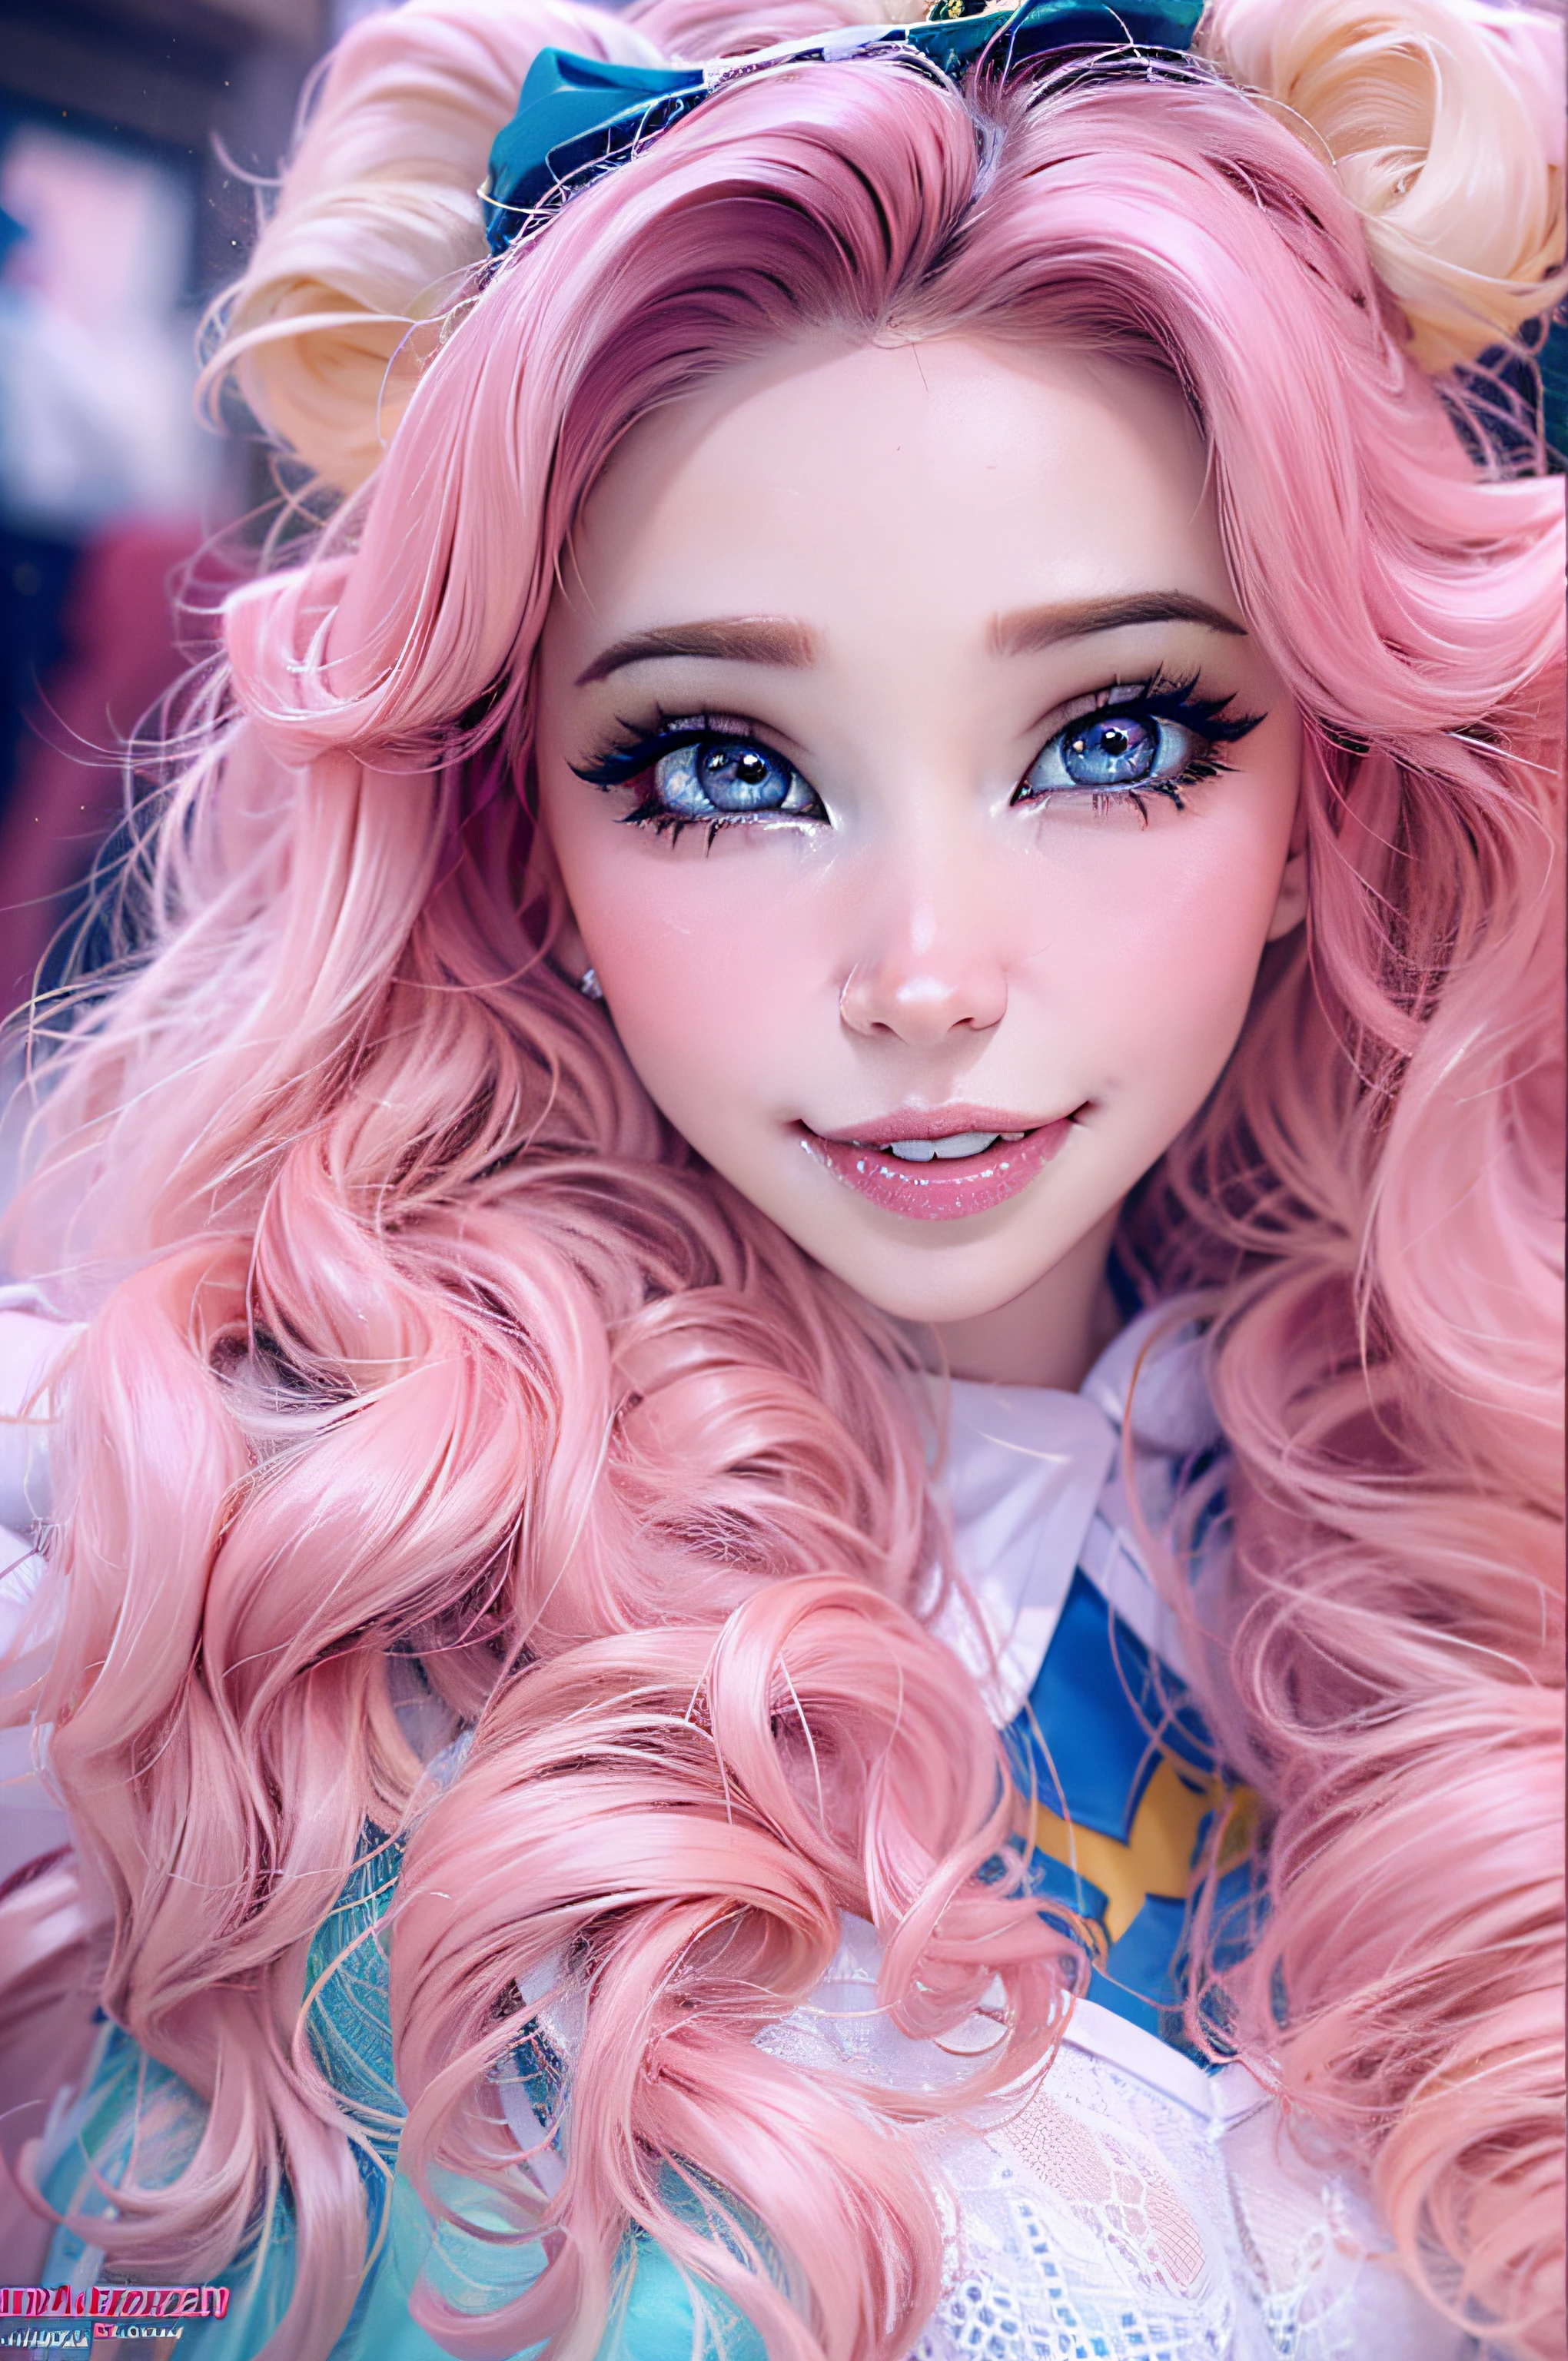 Belle Delphine dressed in a white skin super girl costume, blue eyes, long pink hair, beautiful smile, large eyes, with a costume party in the background